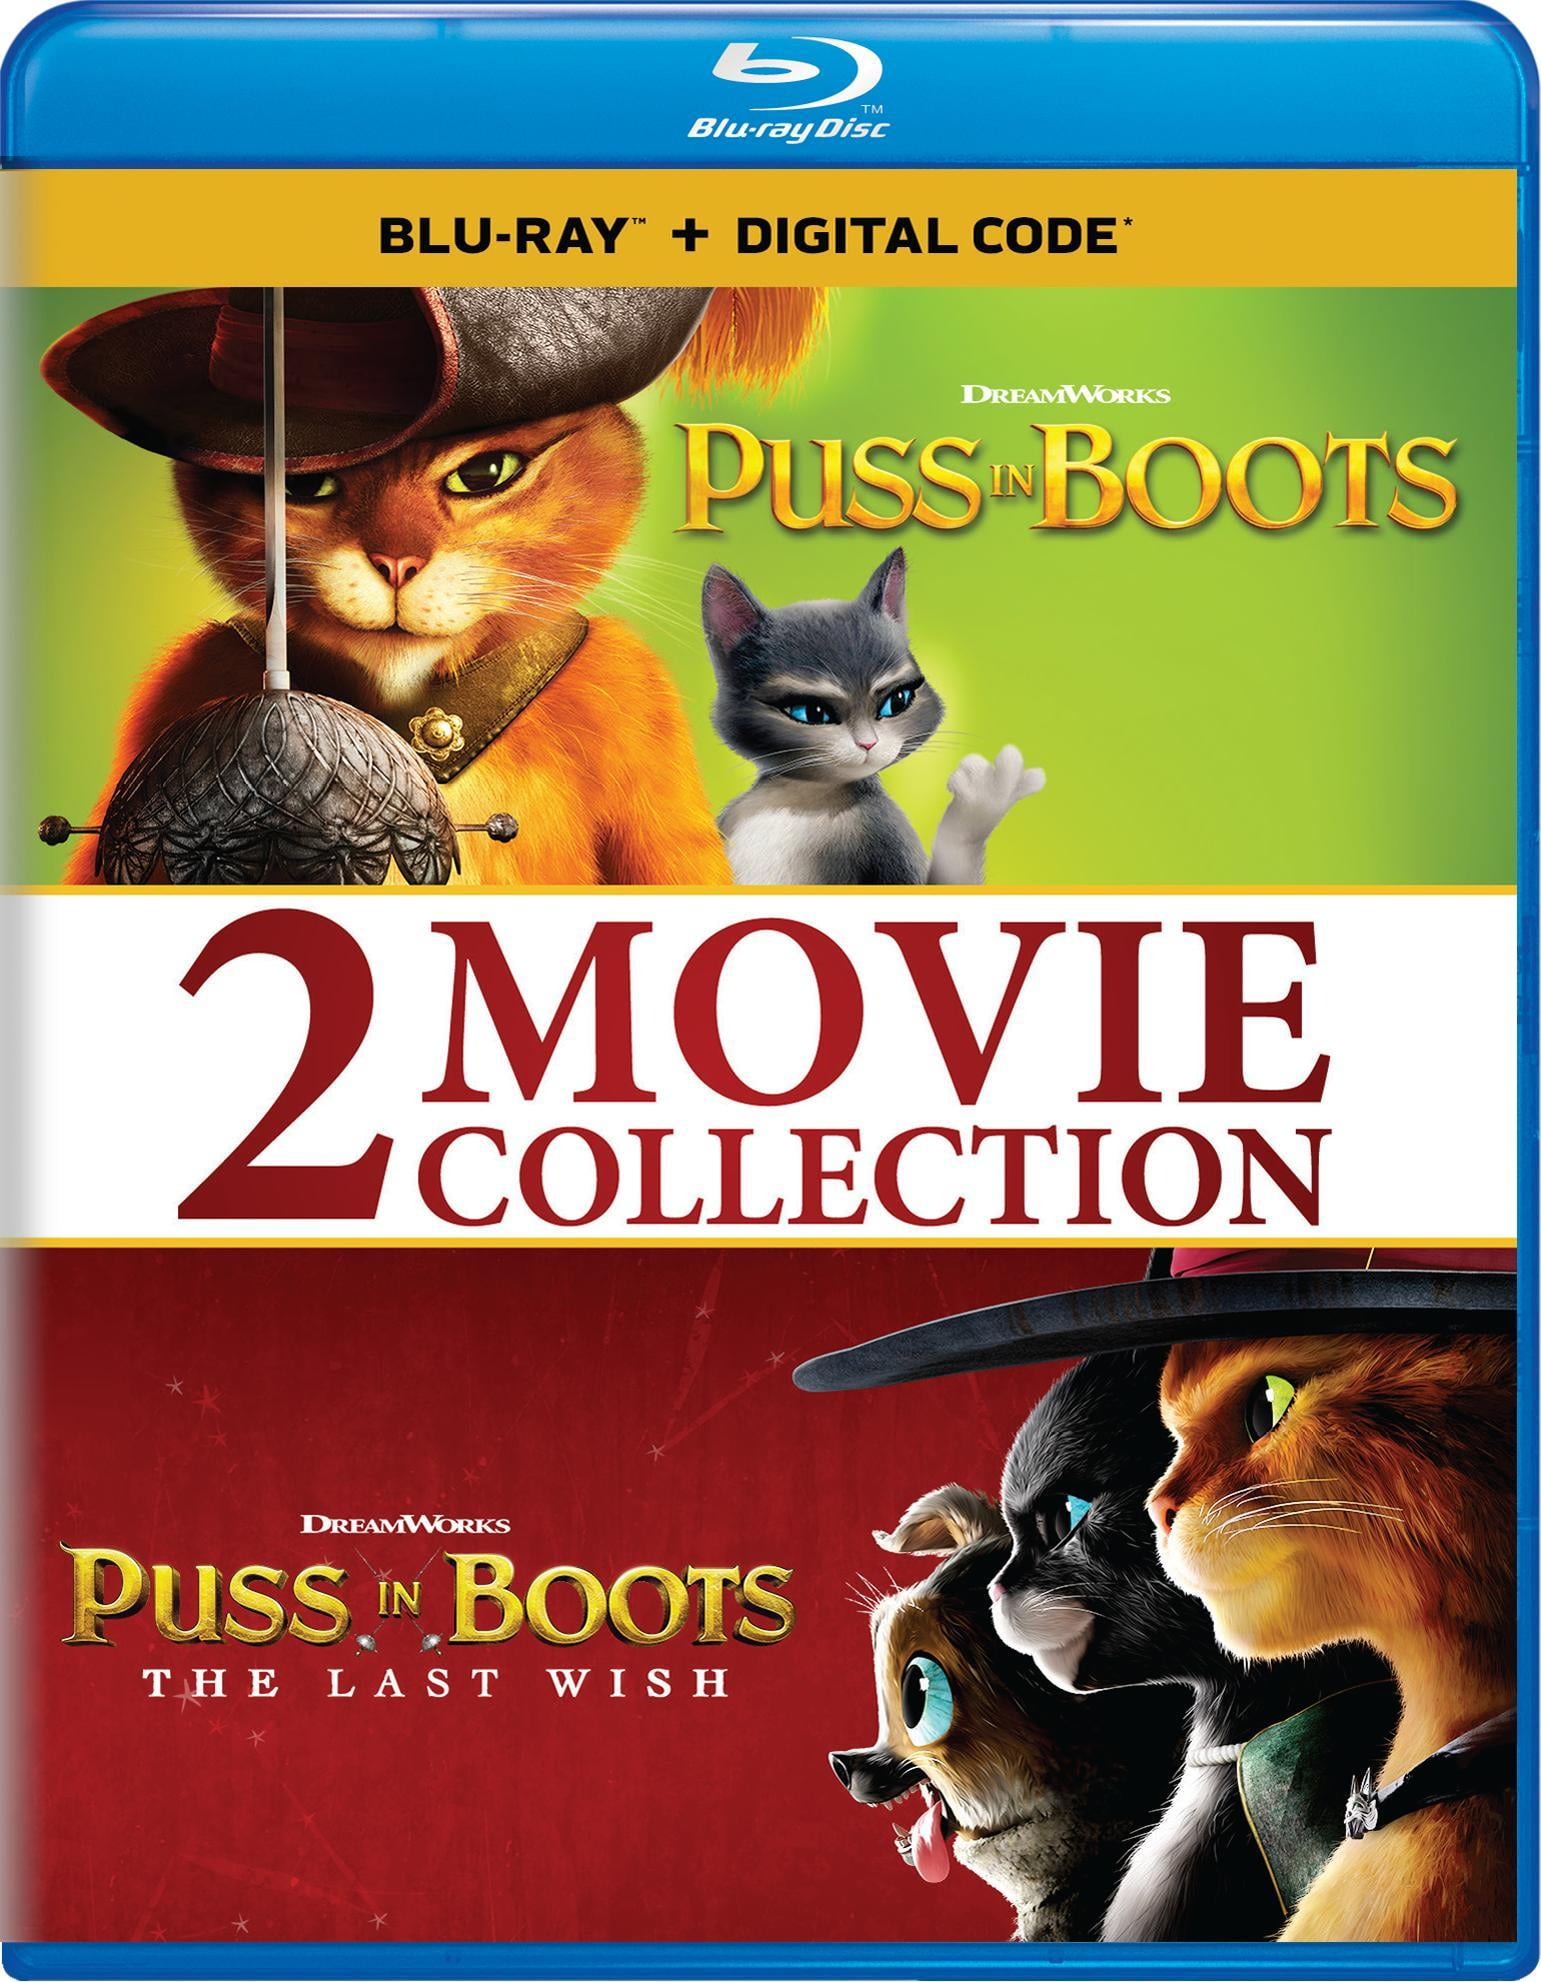 Puss in Boots 2-Movie Collection Blu-ray DVD | Ubuy Botswana